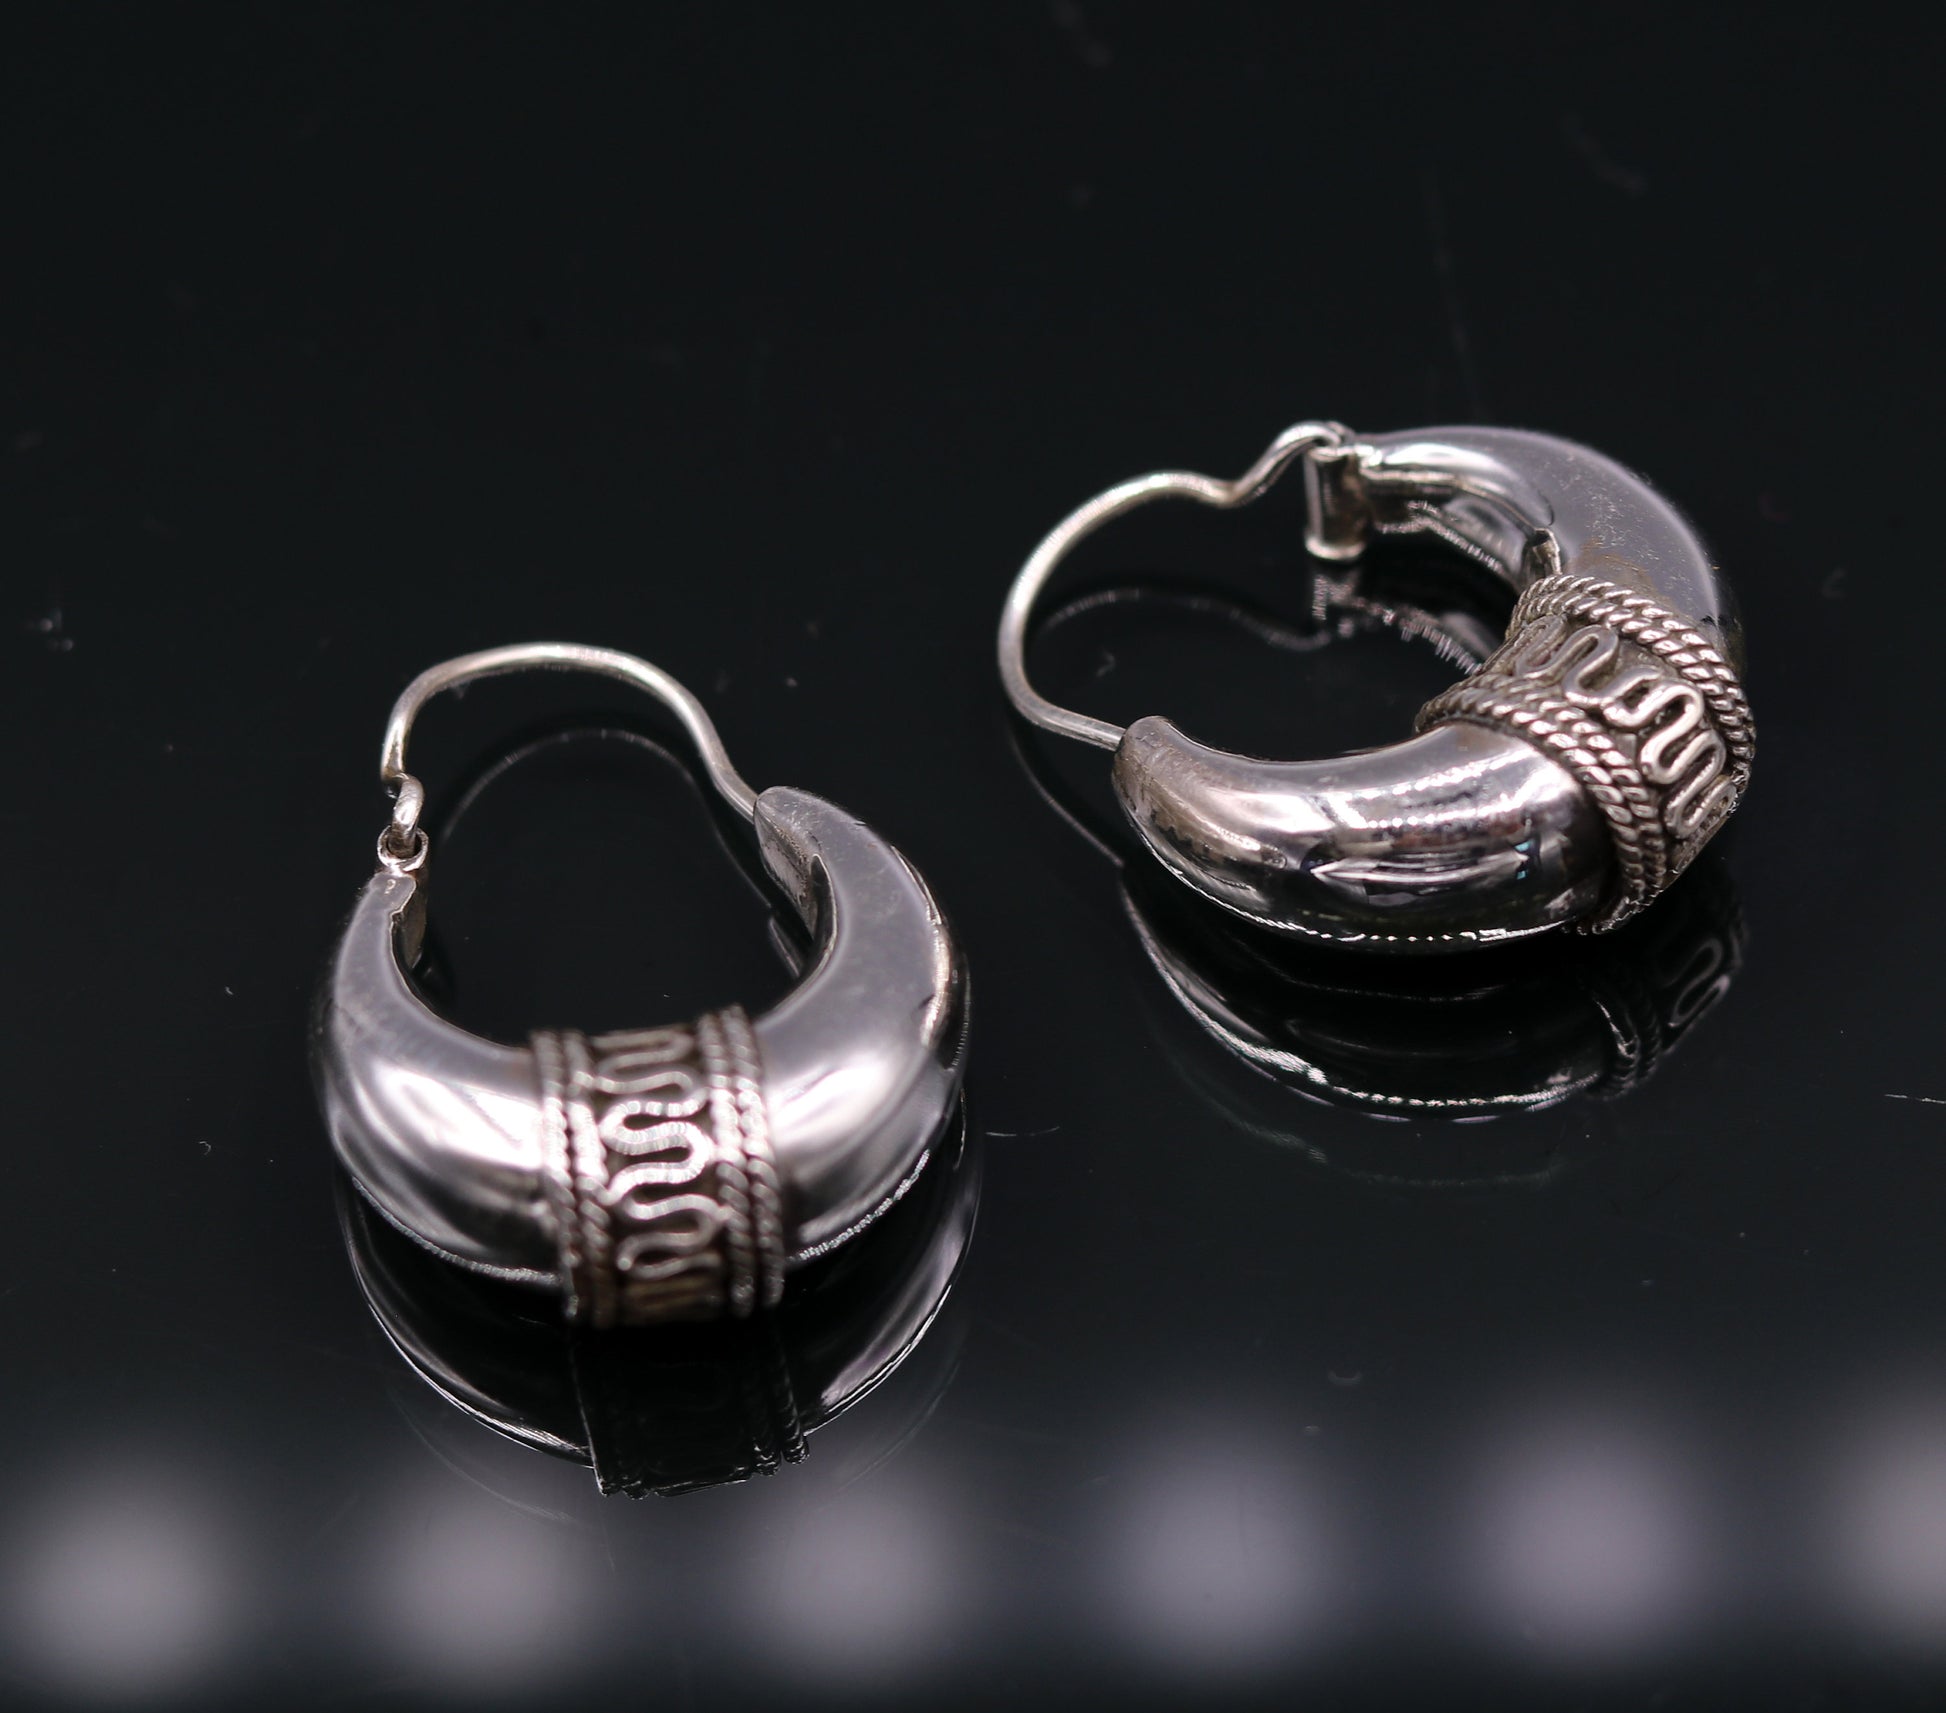 Pure 925 sterling silver handmade vintage ethnic style hoops earrings kundal,ethnic pretty bali tribal belly dance jewelry from india s591 - TRIBAL ORNAMENTS